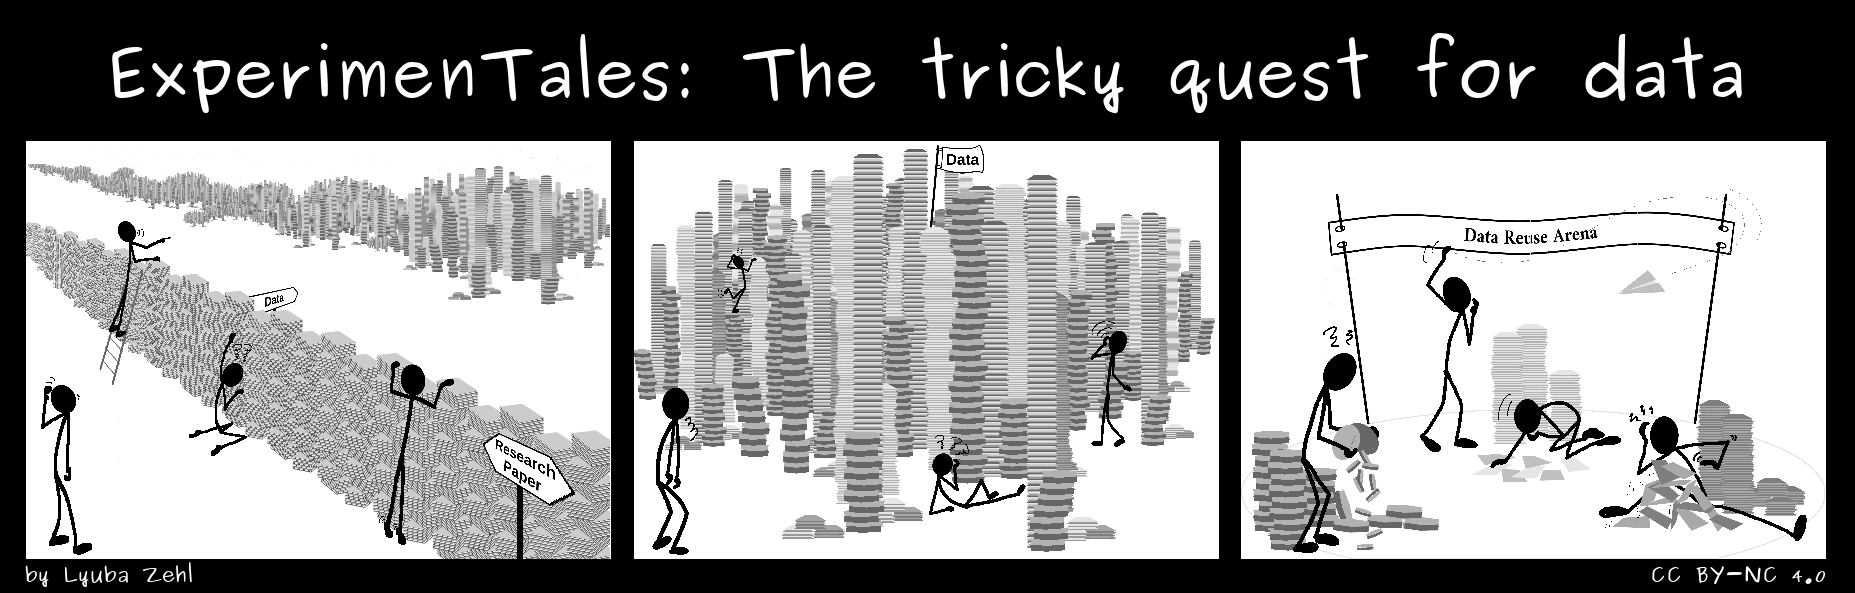 the-tricky-quest-for-data